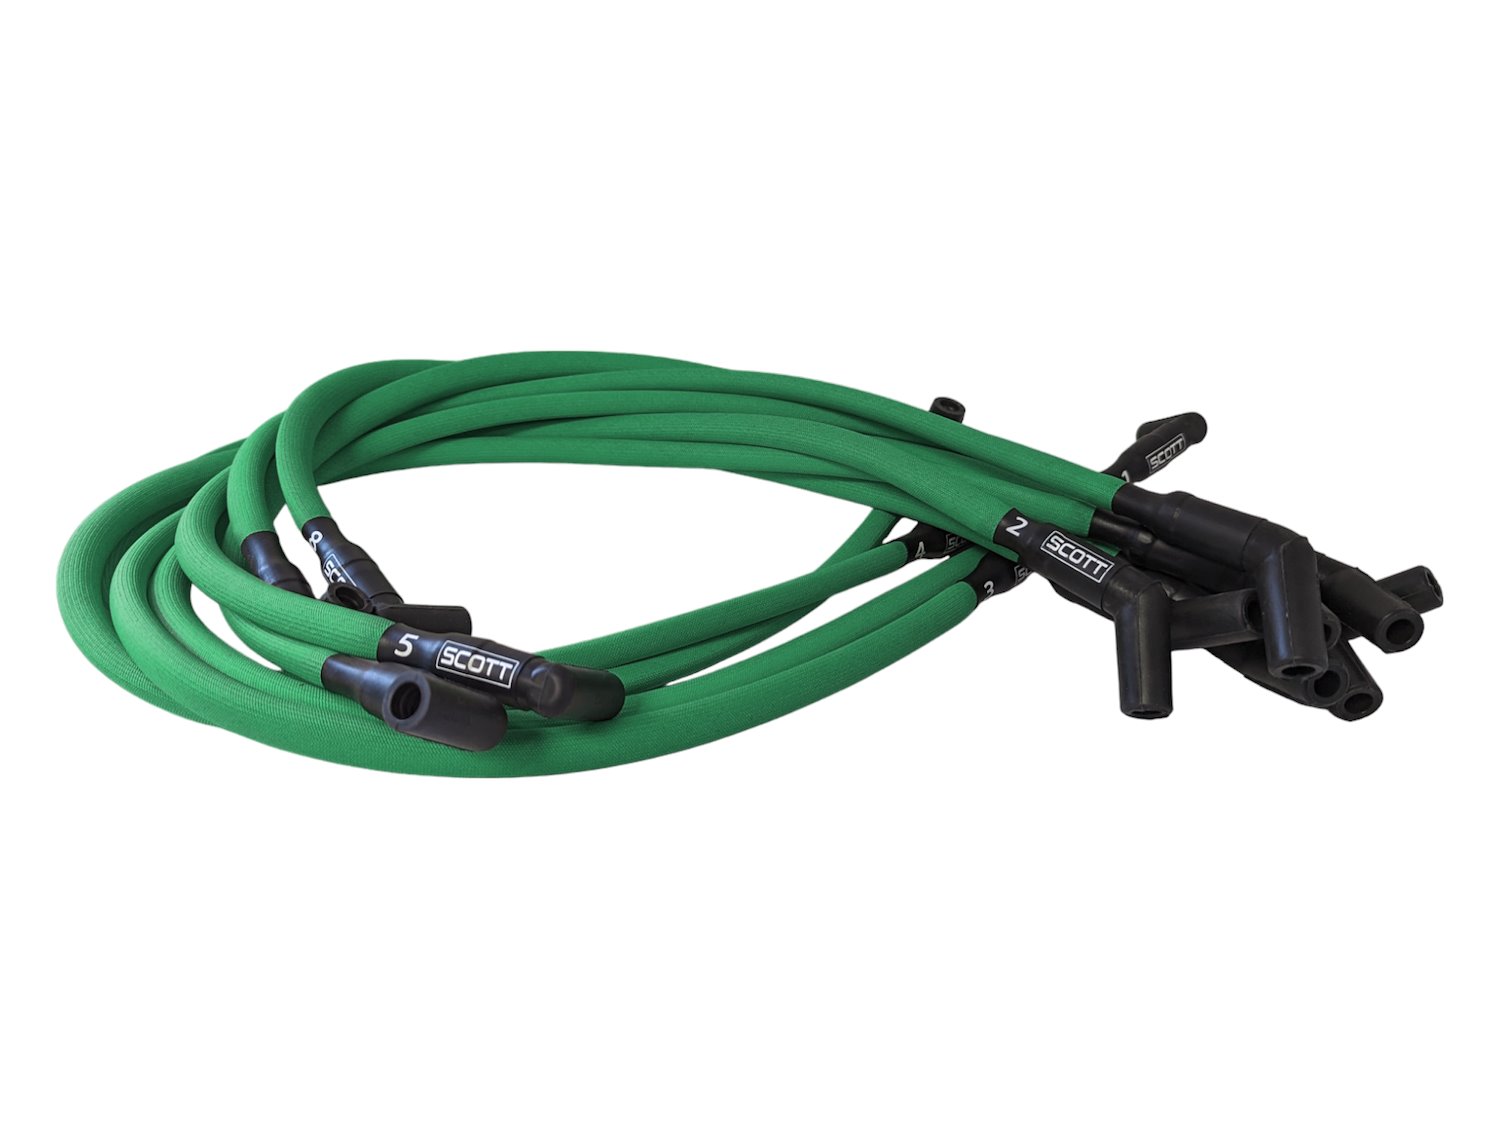 SPW300-PS-426-4 Super Mag Fiberglass-Oversleeved Spark Plug Wire Set for Small Block Ford, Over Valve Cover [Green]